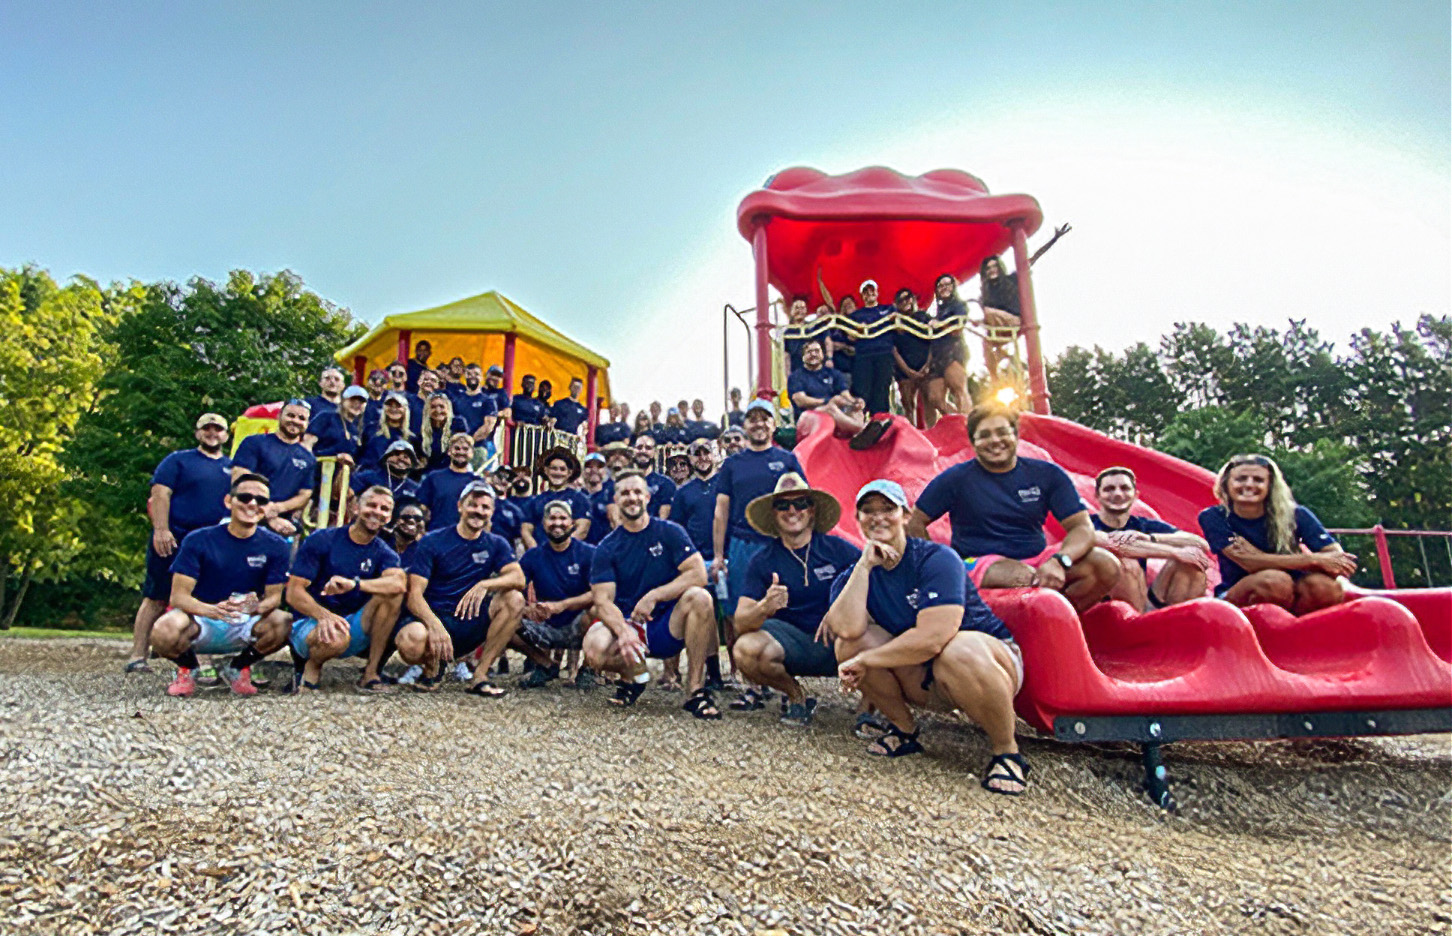 A photo of a large group, all with dark blue shirts, posing on playground equipment